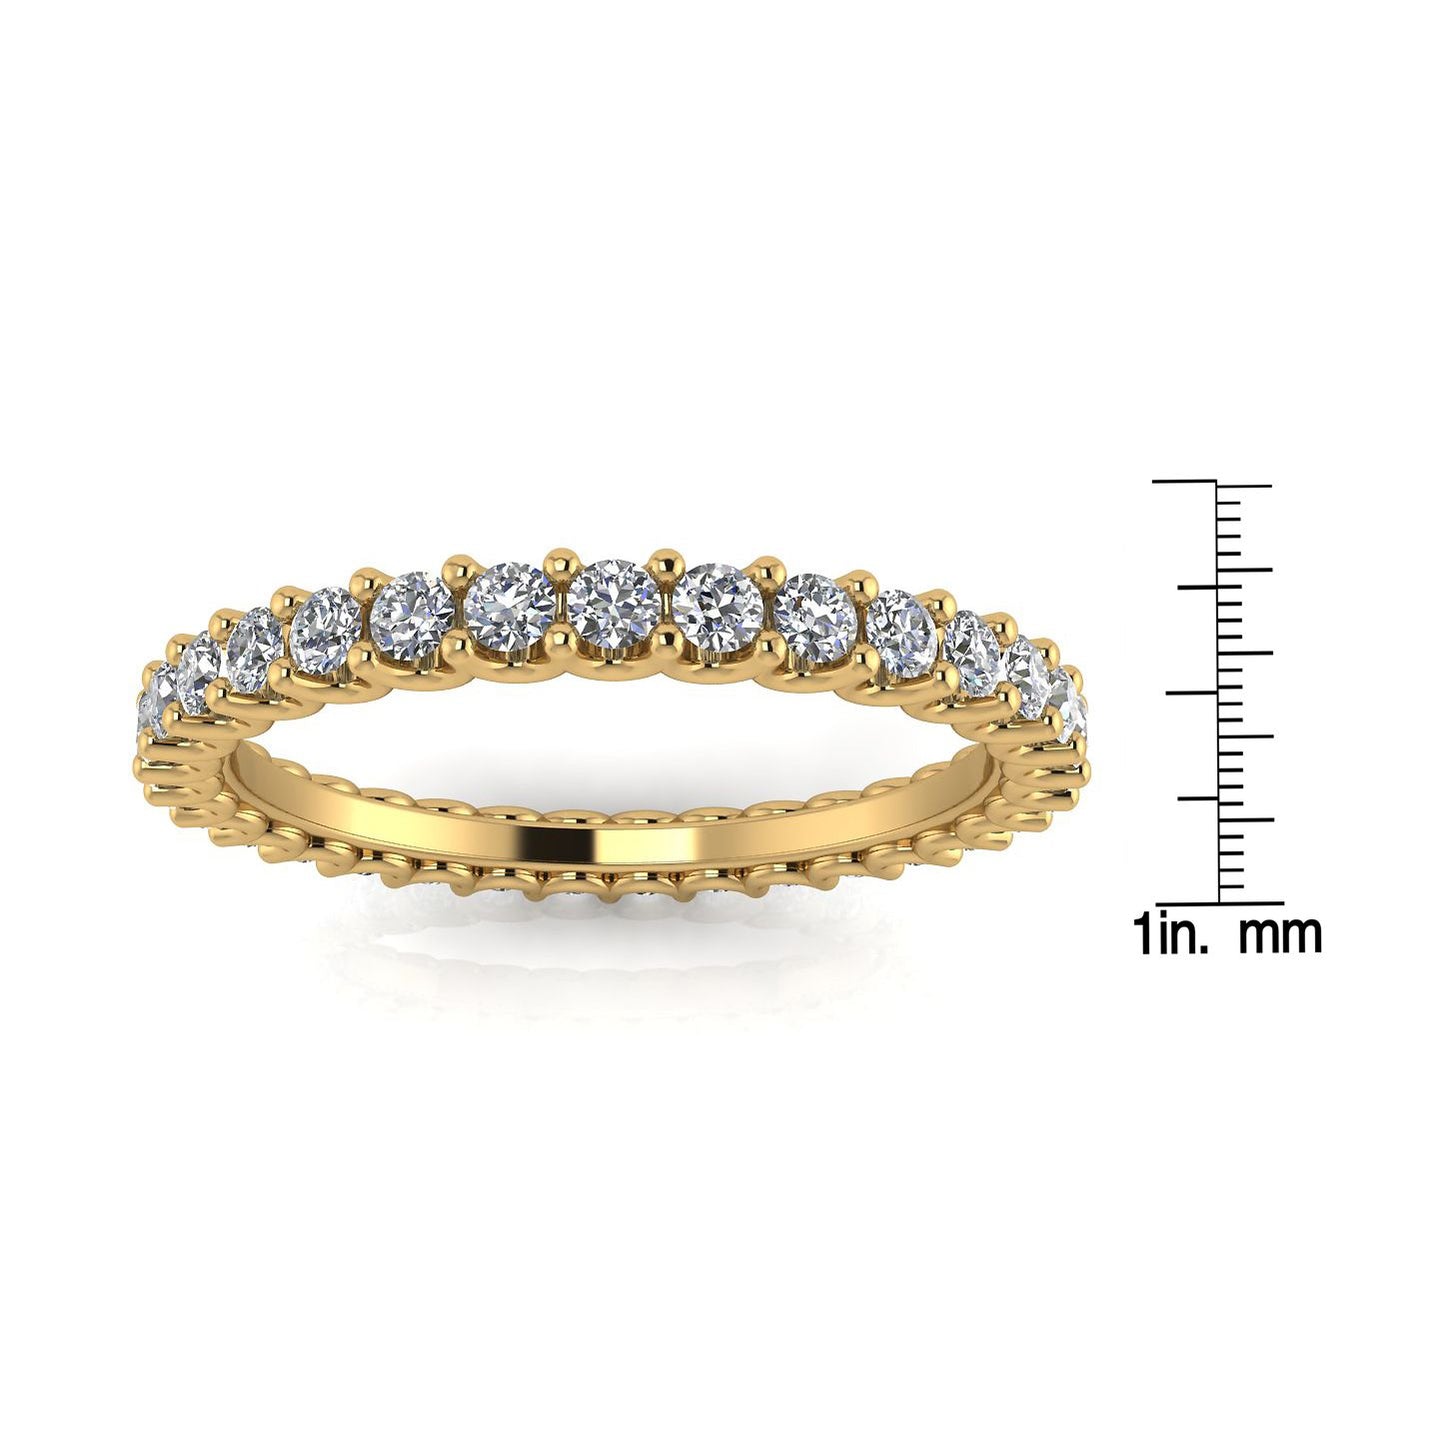 Round Brilliant Cut Diamond Shared Prong Set Eternity Ring In 18k Yellow Gold  (0.96ct. Tw.) Ring Size 7.5